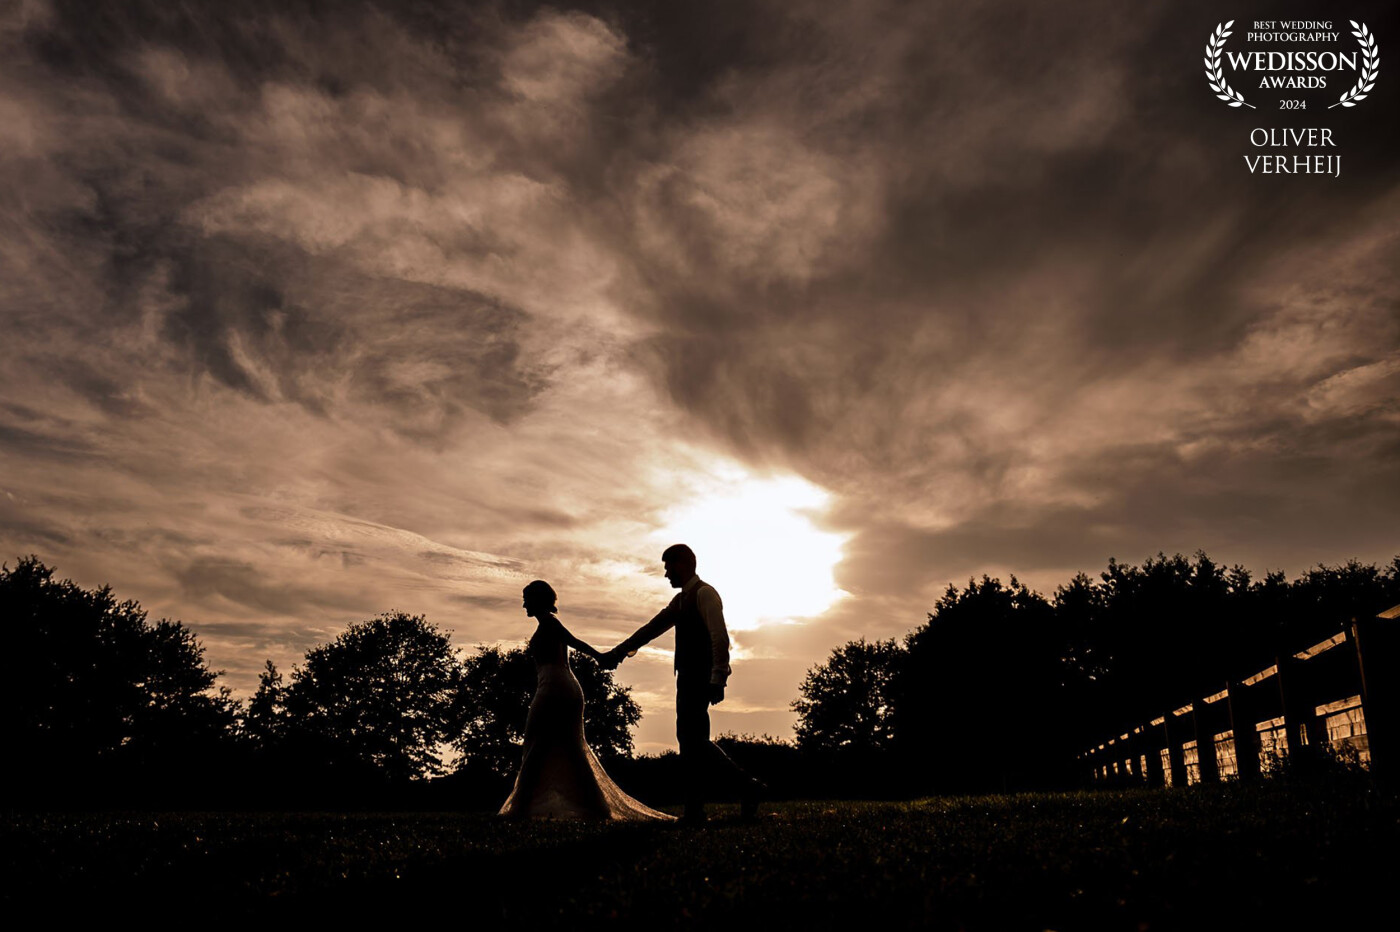 Twilight is the most magical moment of the day. During the golden hour I love to take the newly weds on a stroll to make a wonderful silhouette photo.